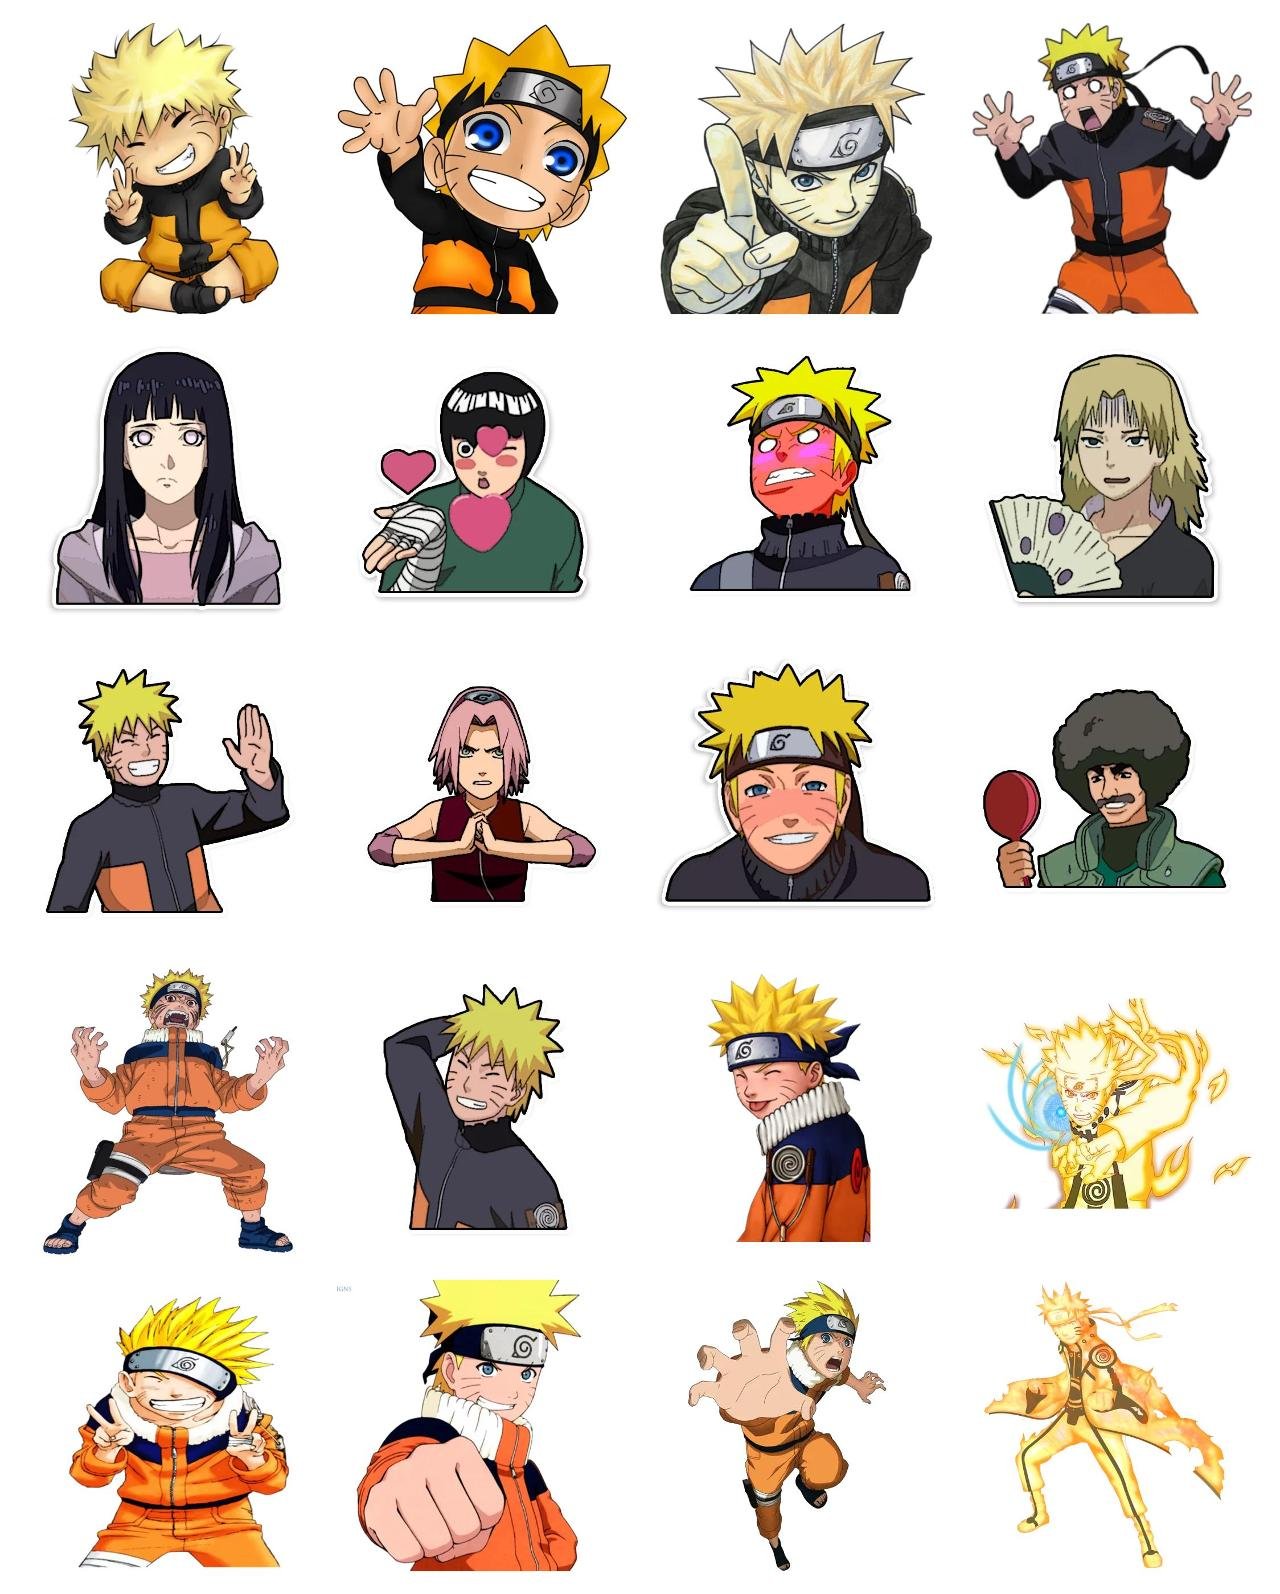 Nauto #1 Anime, Naruto sticker pack for Whatsapp, Telegram, Signal, and others chatting and message apps